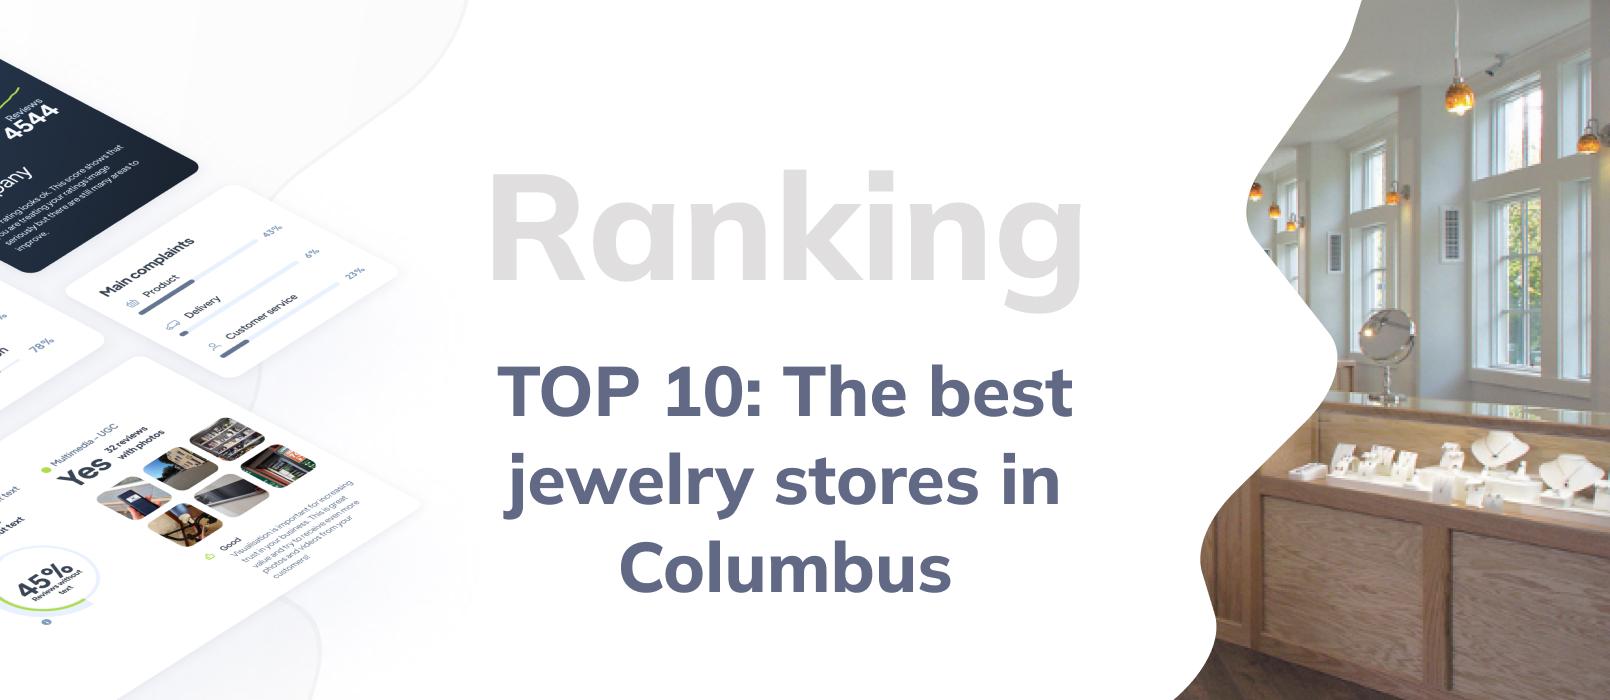 Jewelry stores in Columbus - TOP 10 ranking